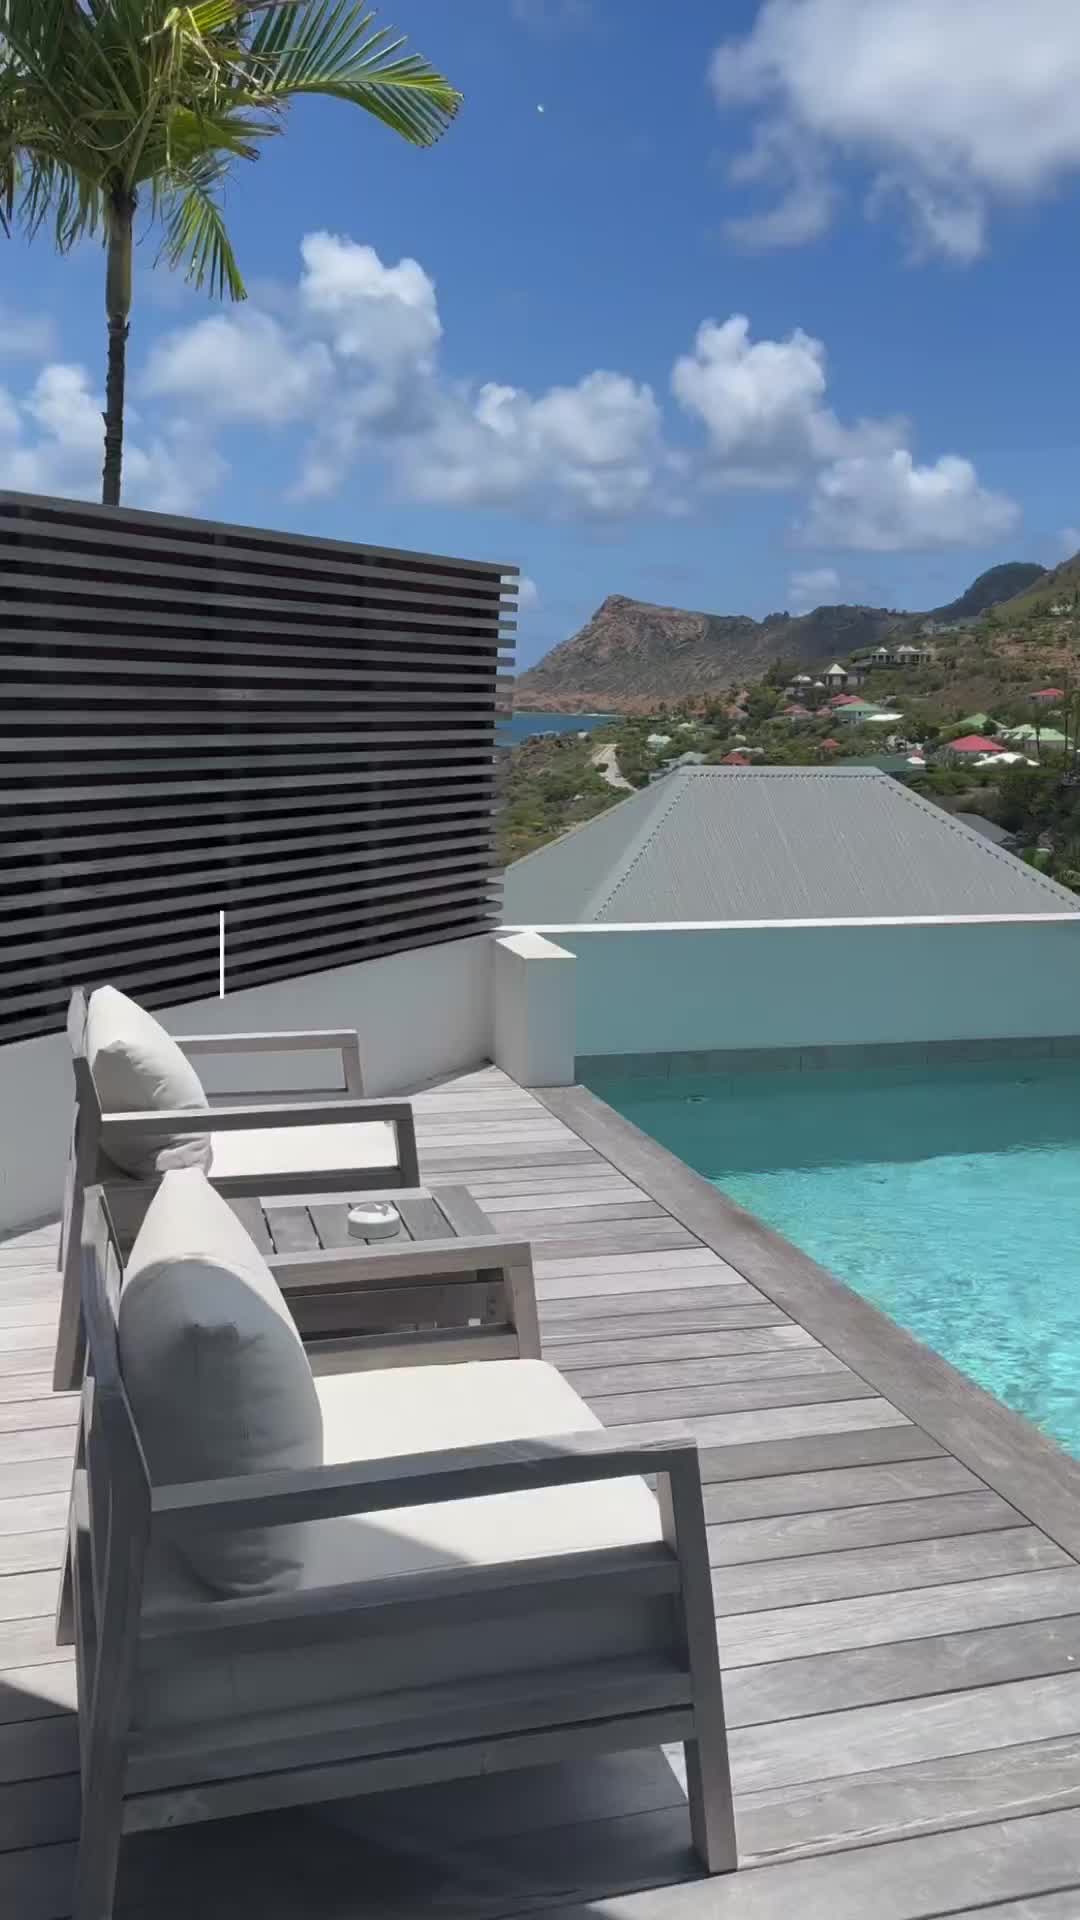 St. Barths Diaries: Luxe Vacation at Hôtel Le Toiny